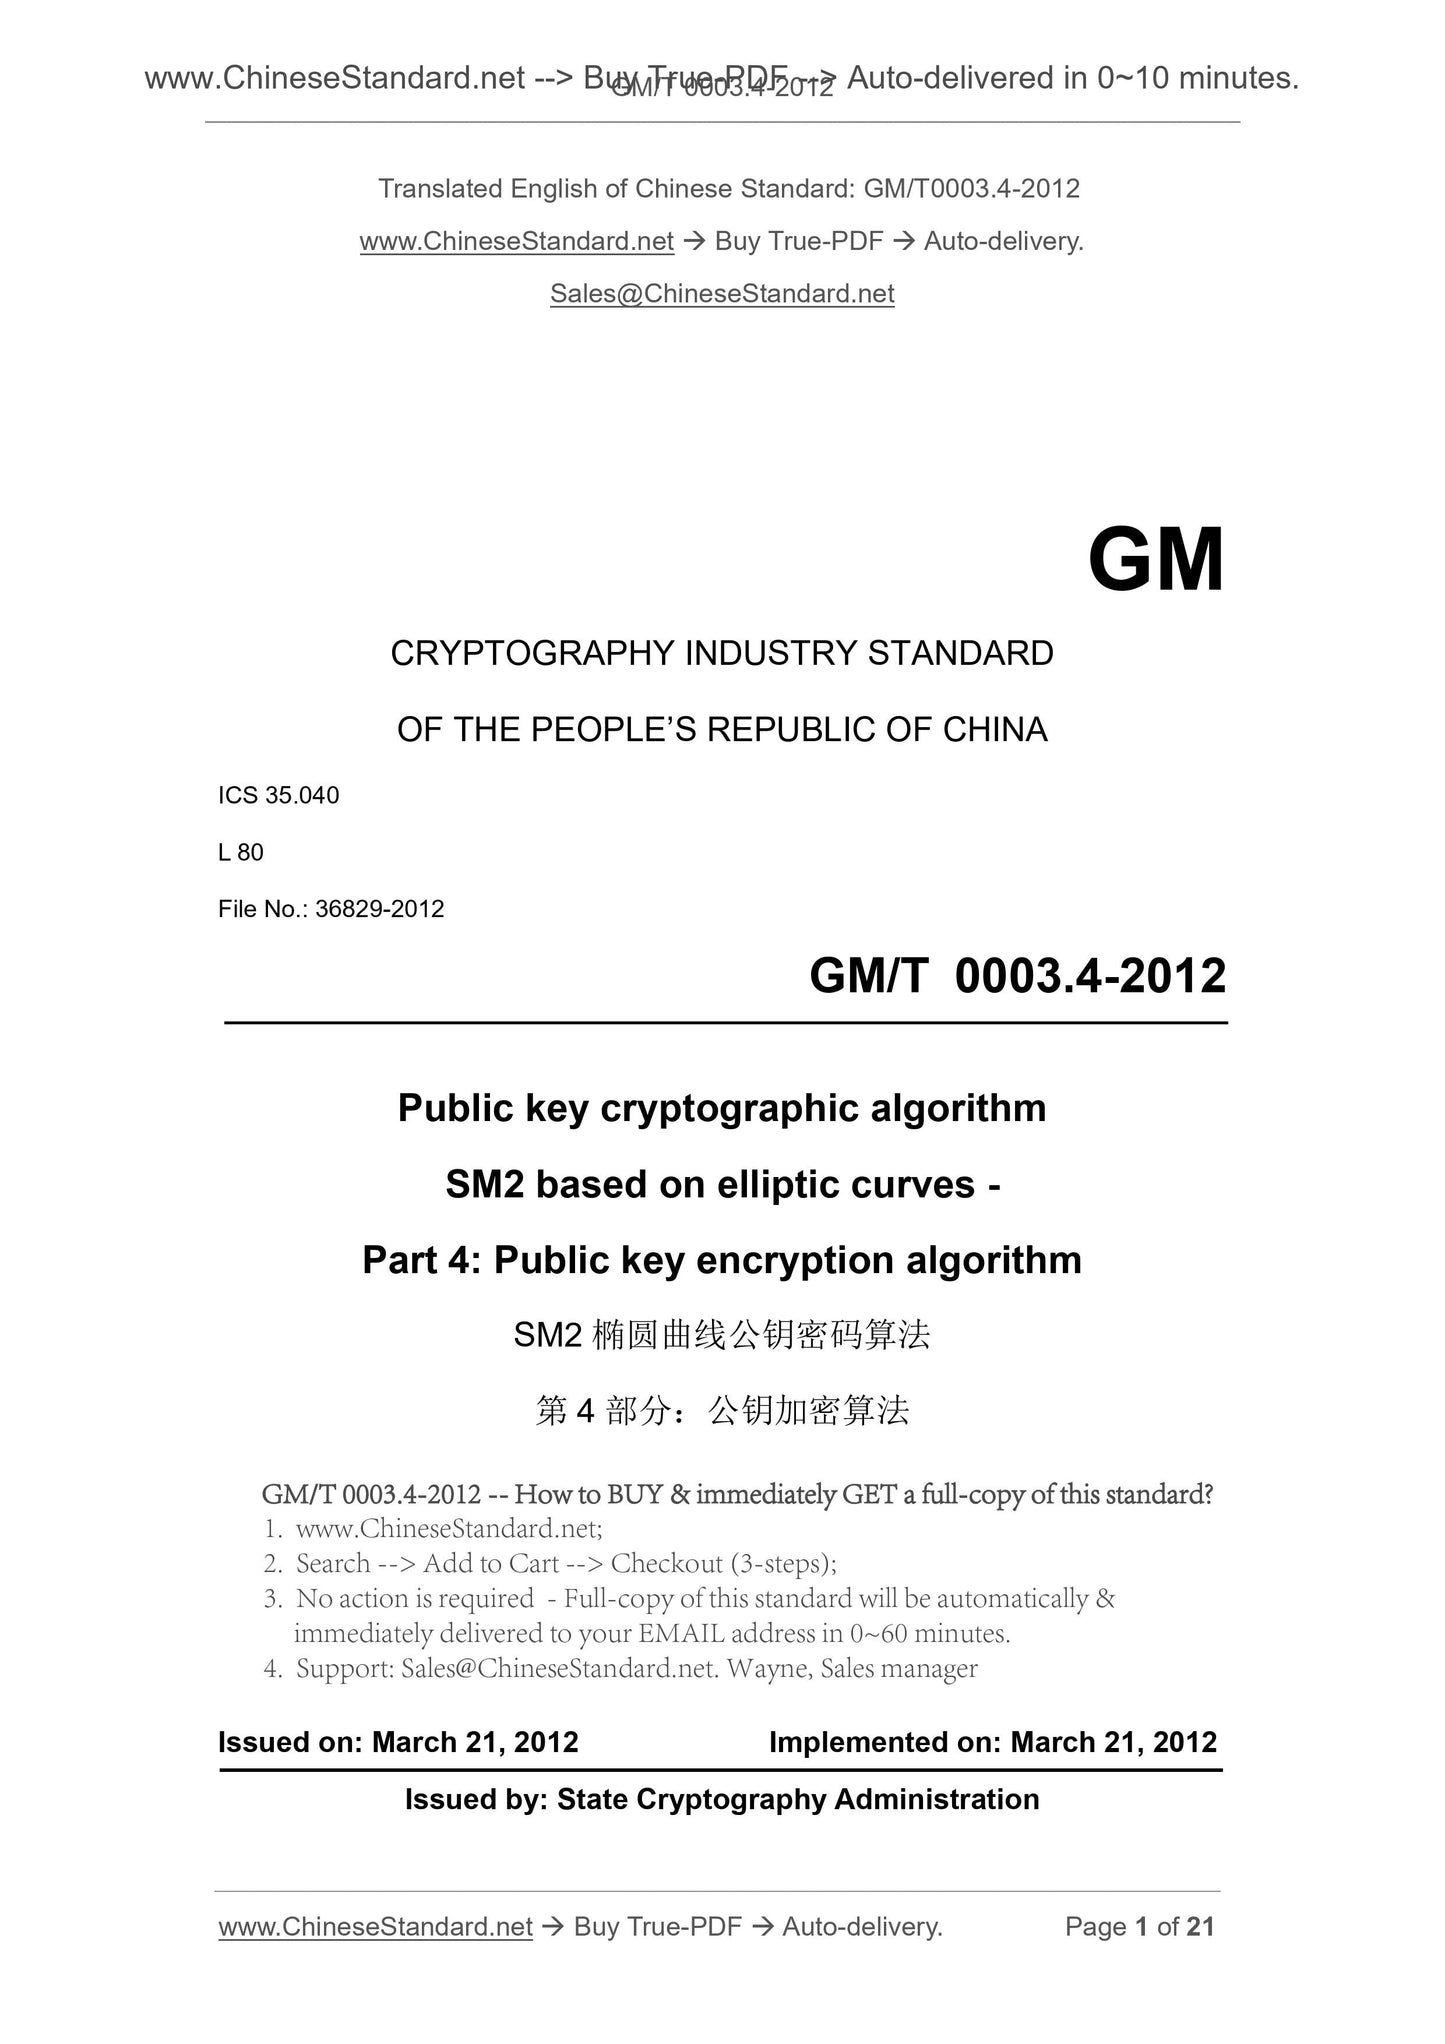 GM/T 0003.4-2012 Page 1